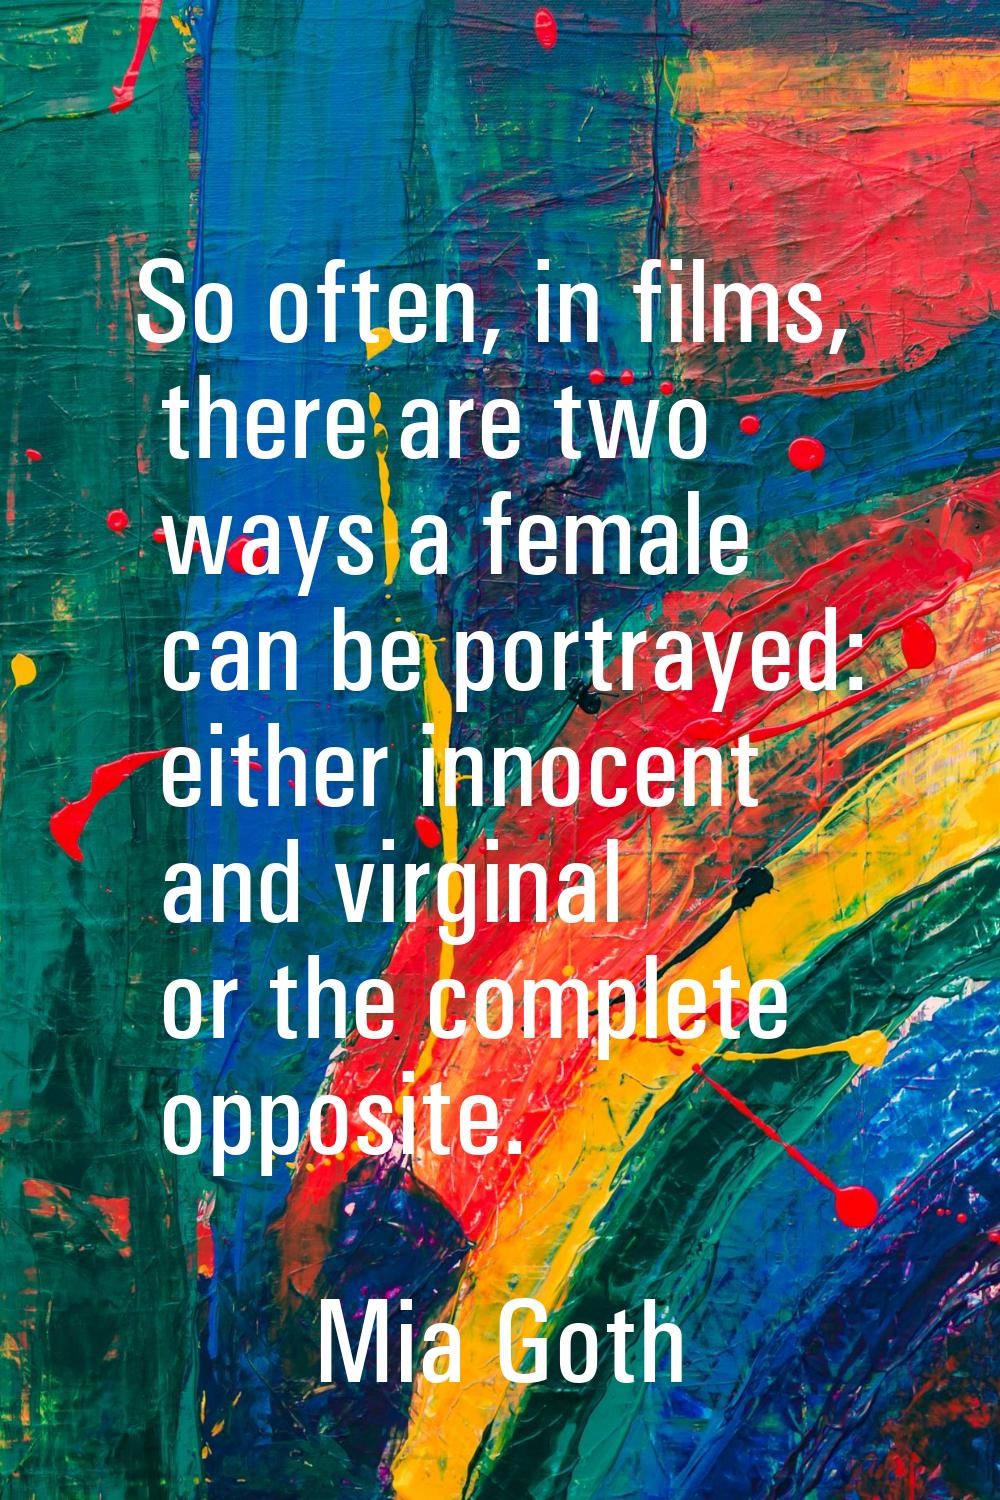 So often, in films, there are two ways a female can be portrayed: either innocent and virginal or t